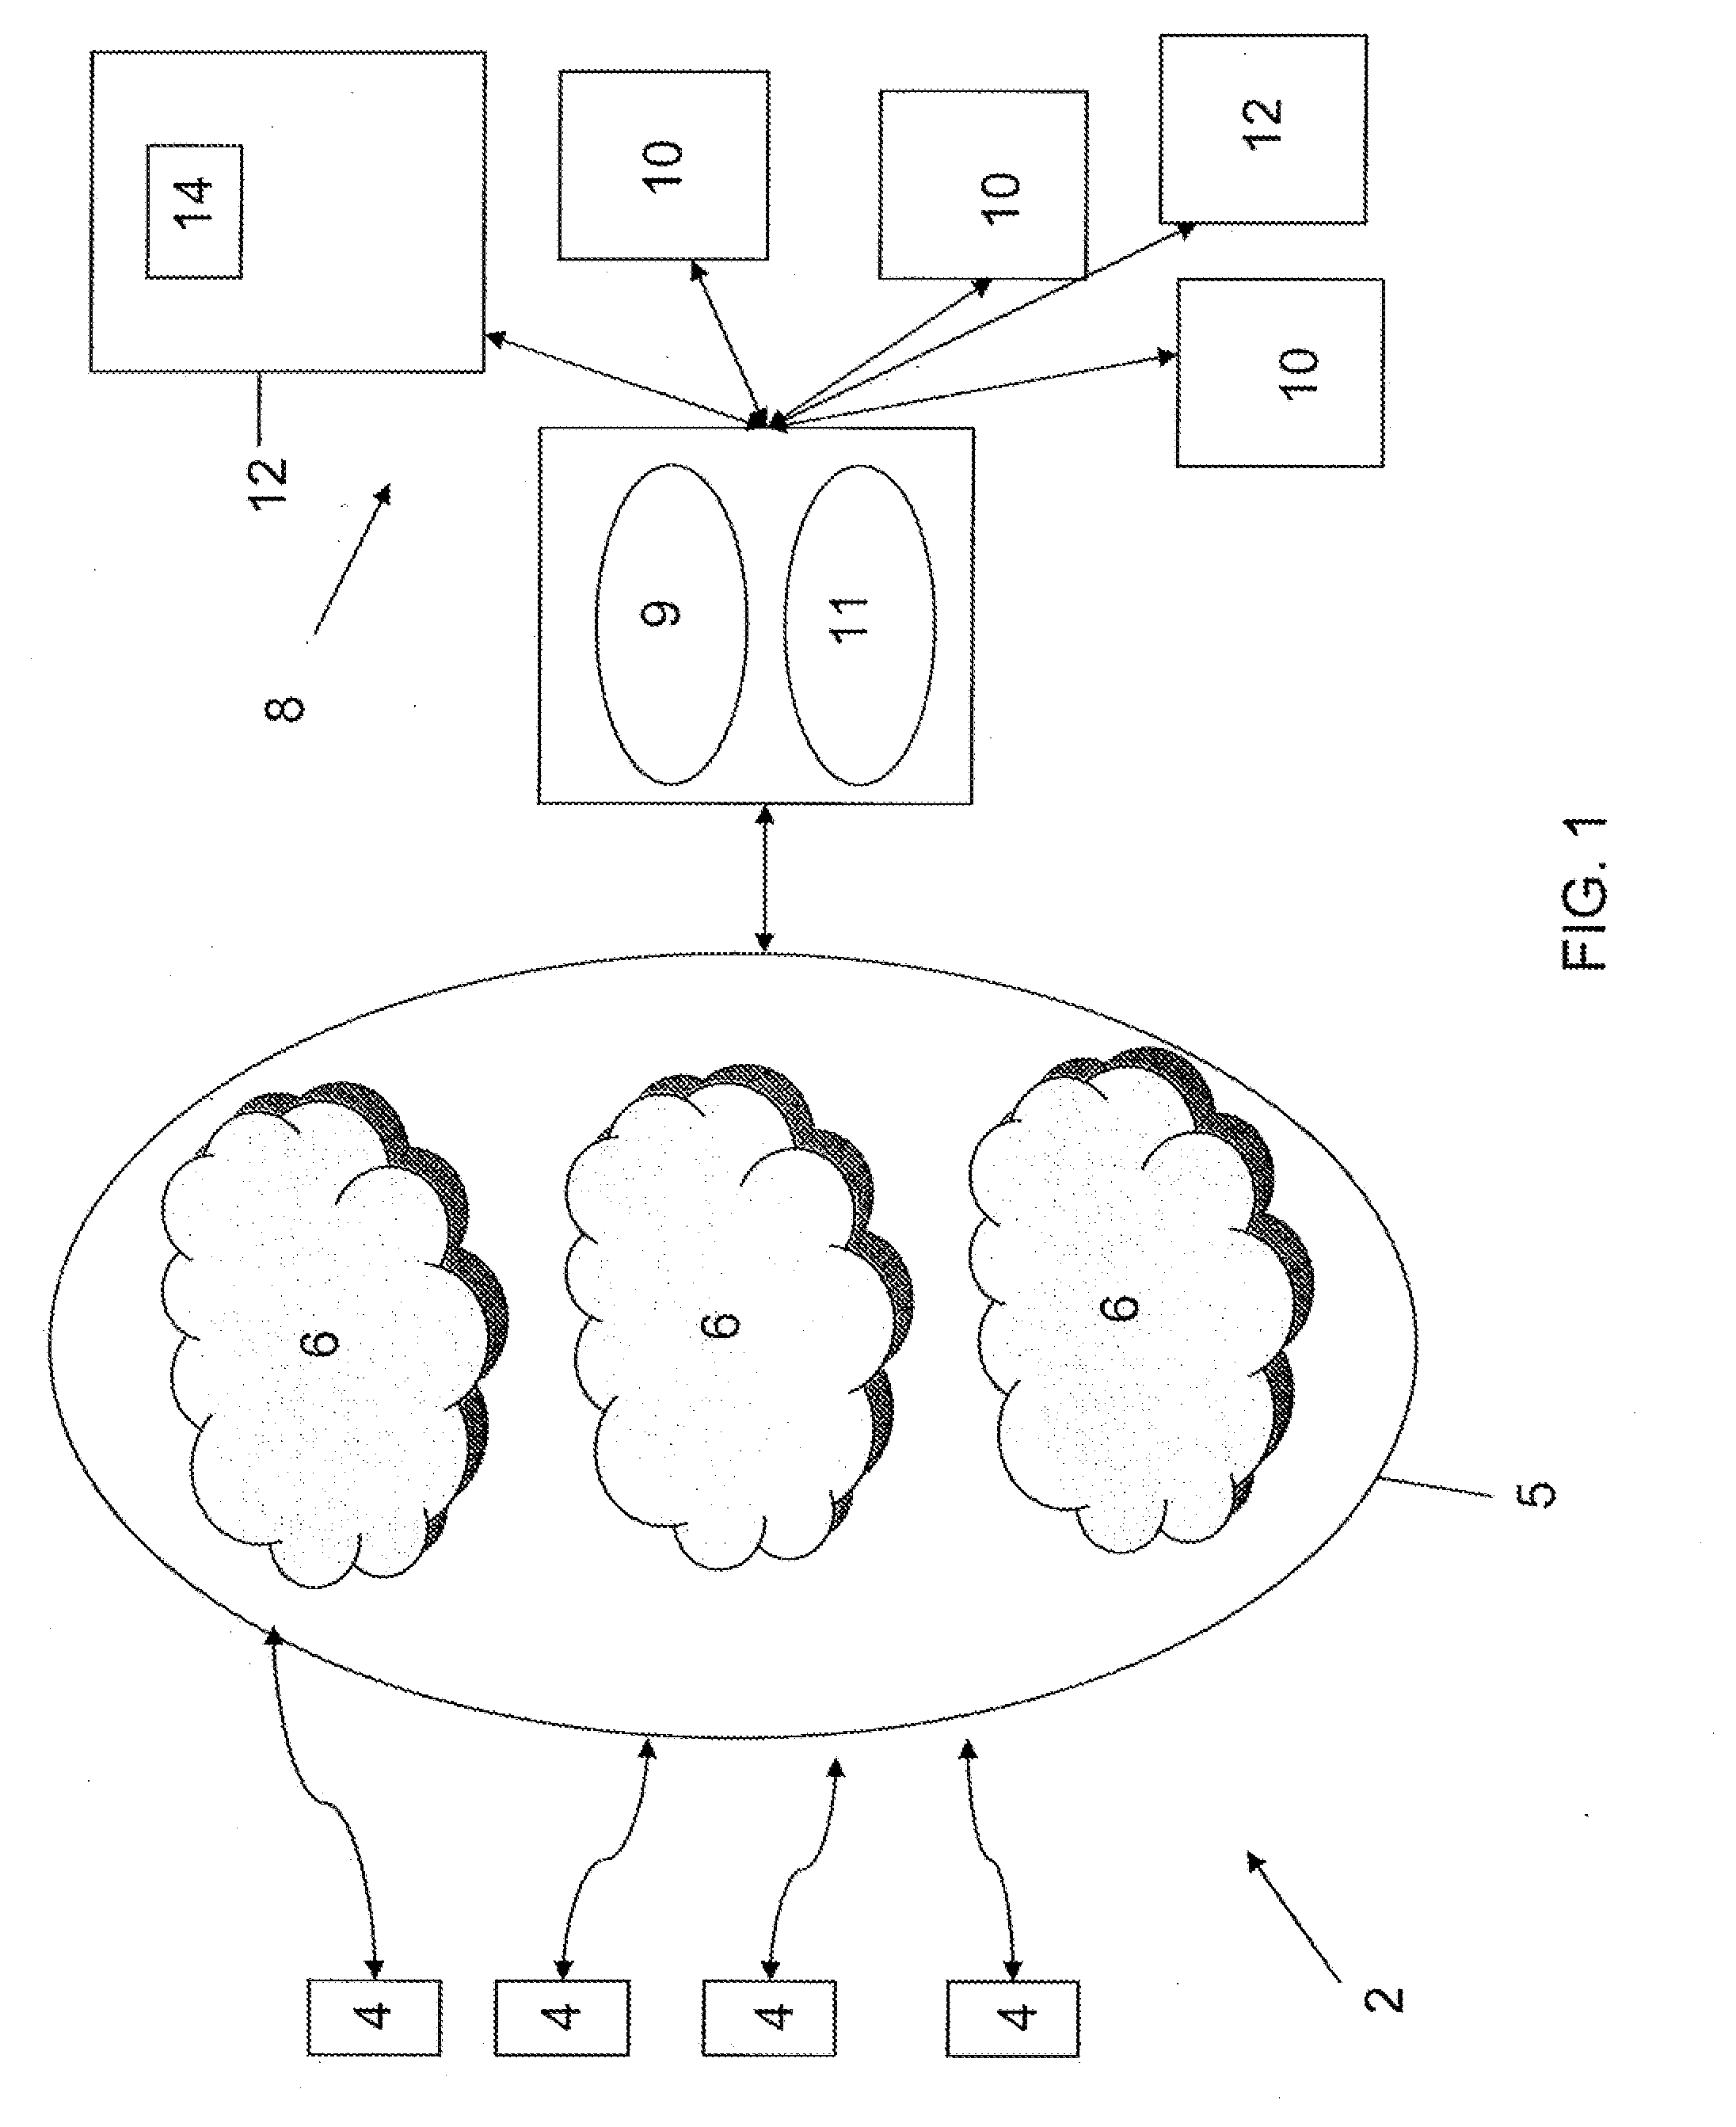 Method of updating core domain information for routing a service, communication device, and communication environment